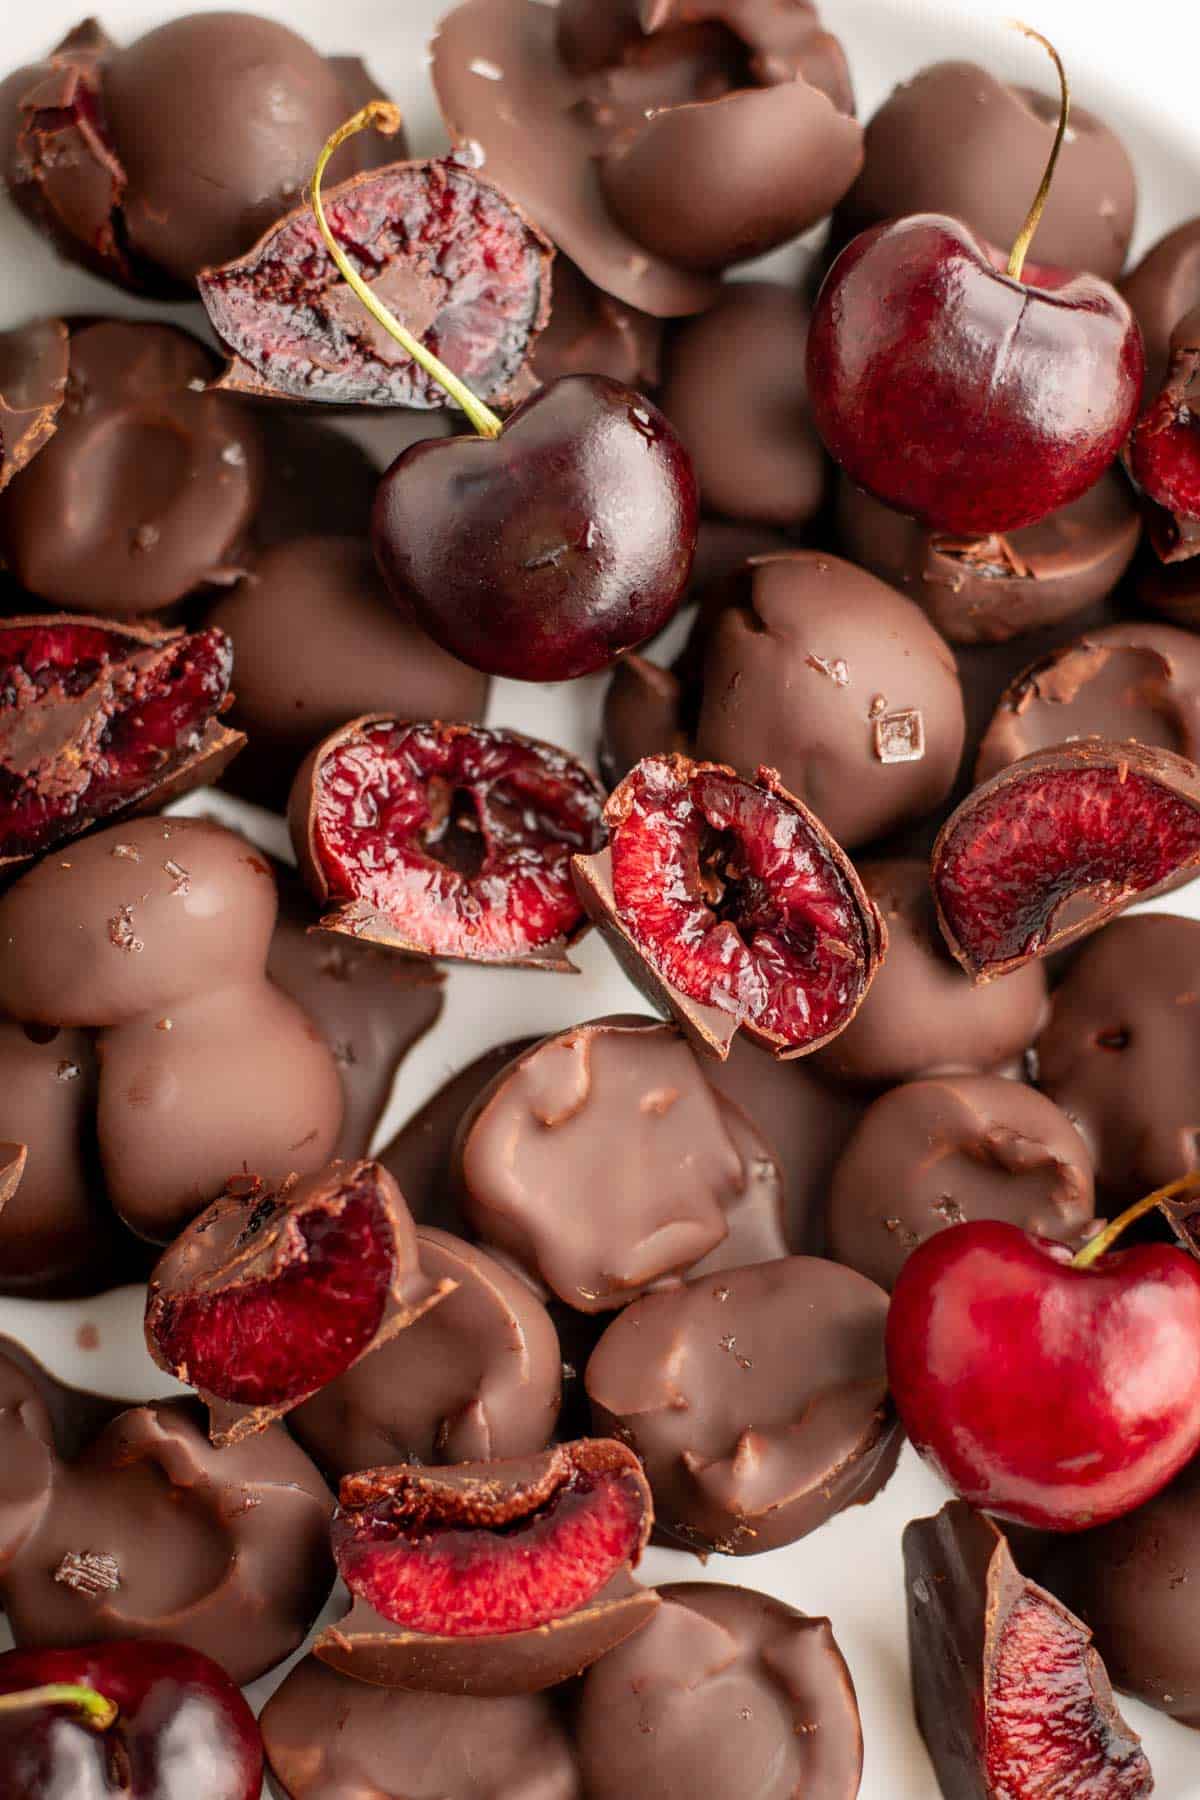 A close-up of chocolate covered cherries on a white plate.